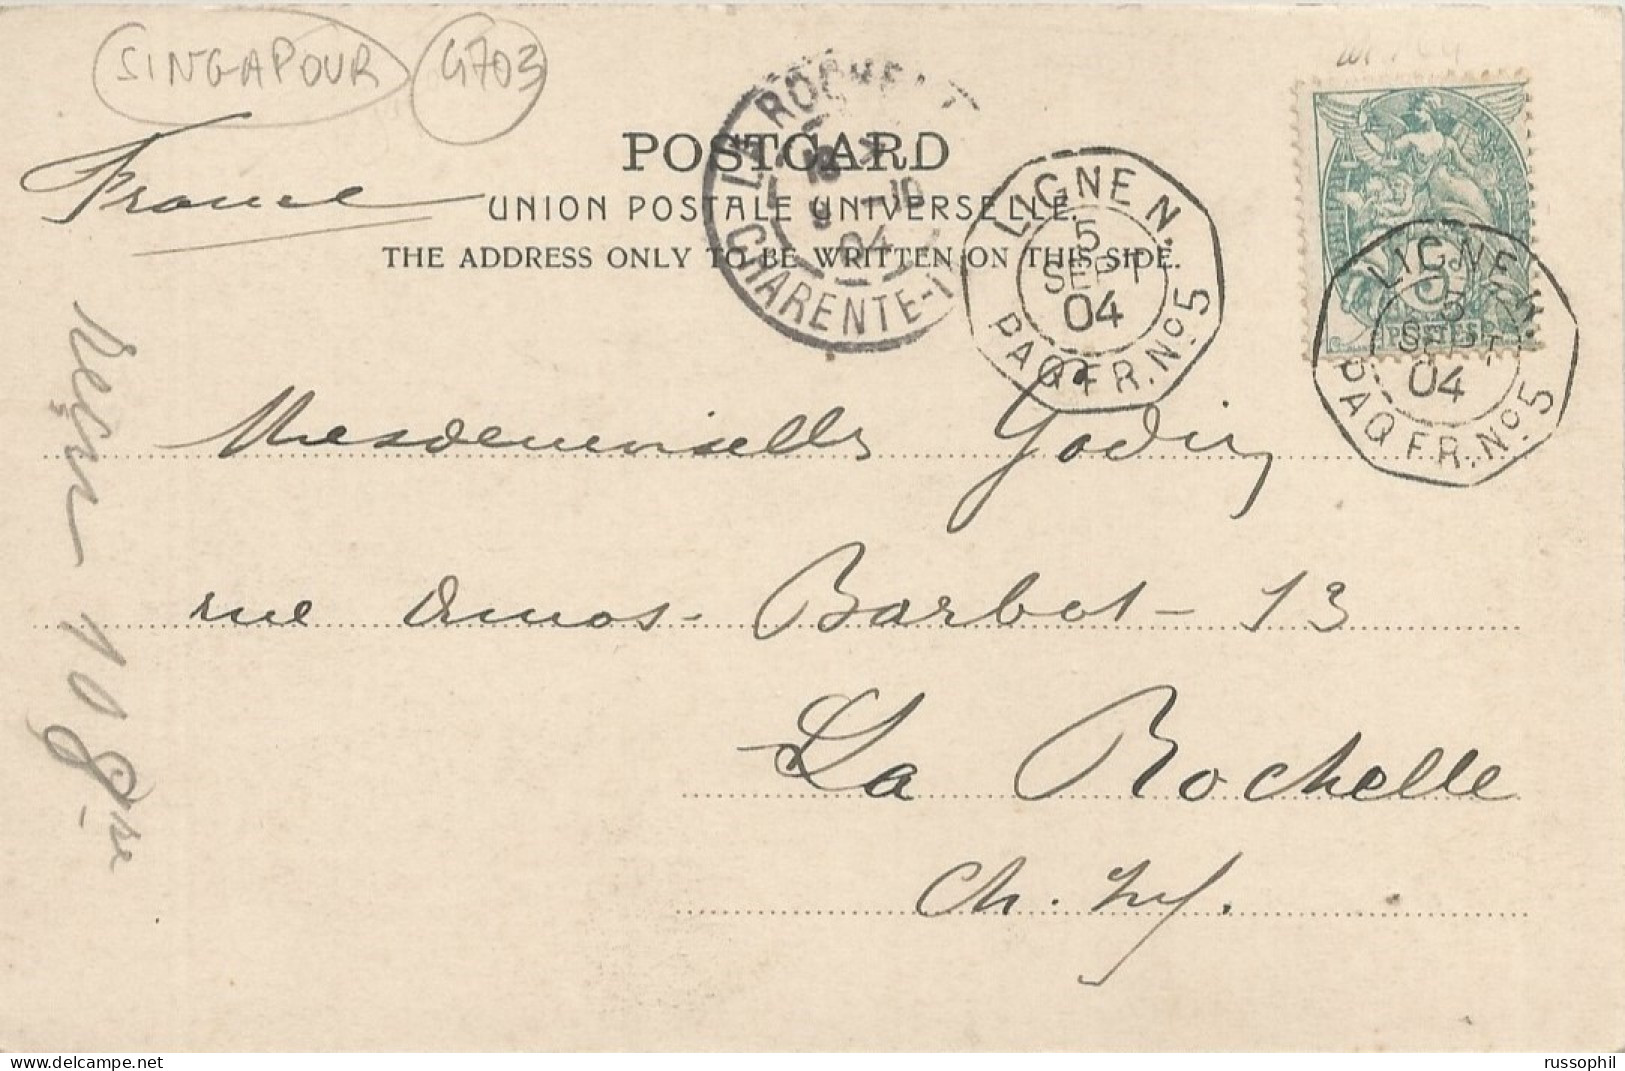 FRANCE - SEA POST- "LIGNE N" DEPARTURE PMK ON FRANKED PC (VIEW OF SINGAPORE) TO FRANCE - 1904 - Schiffspost